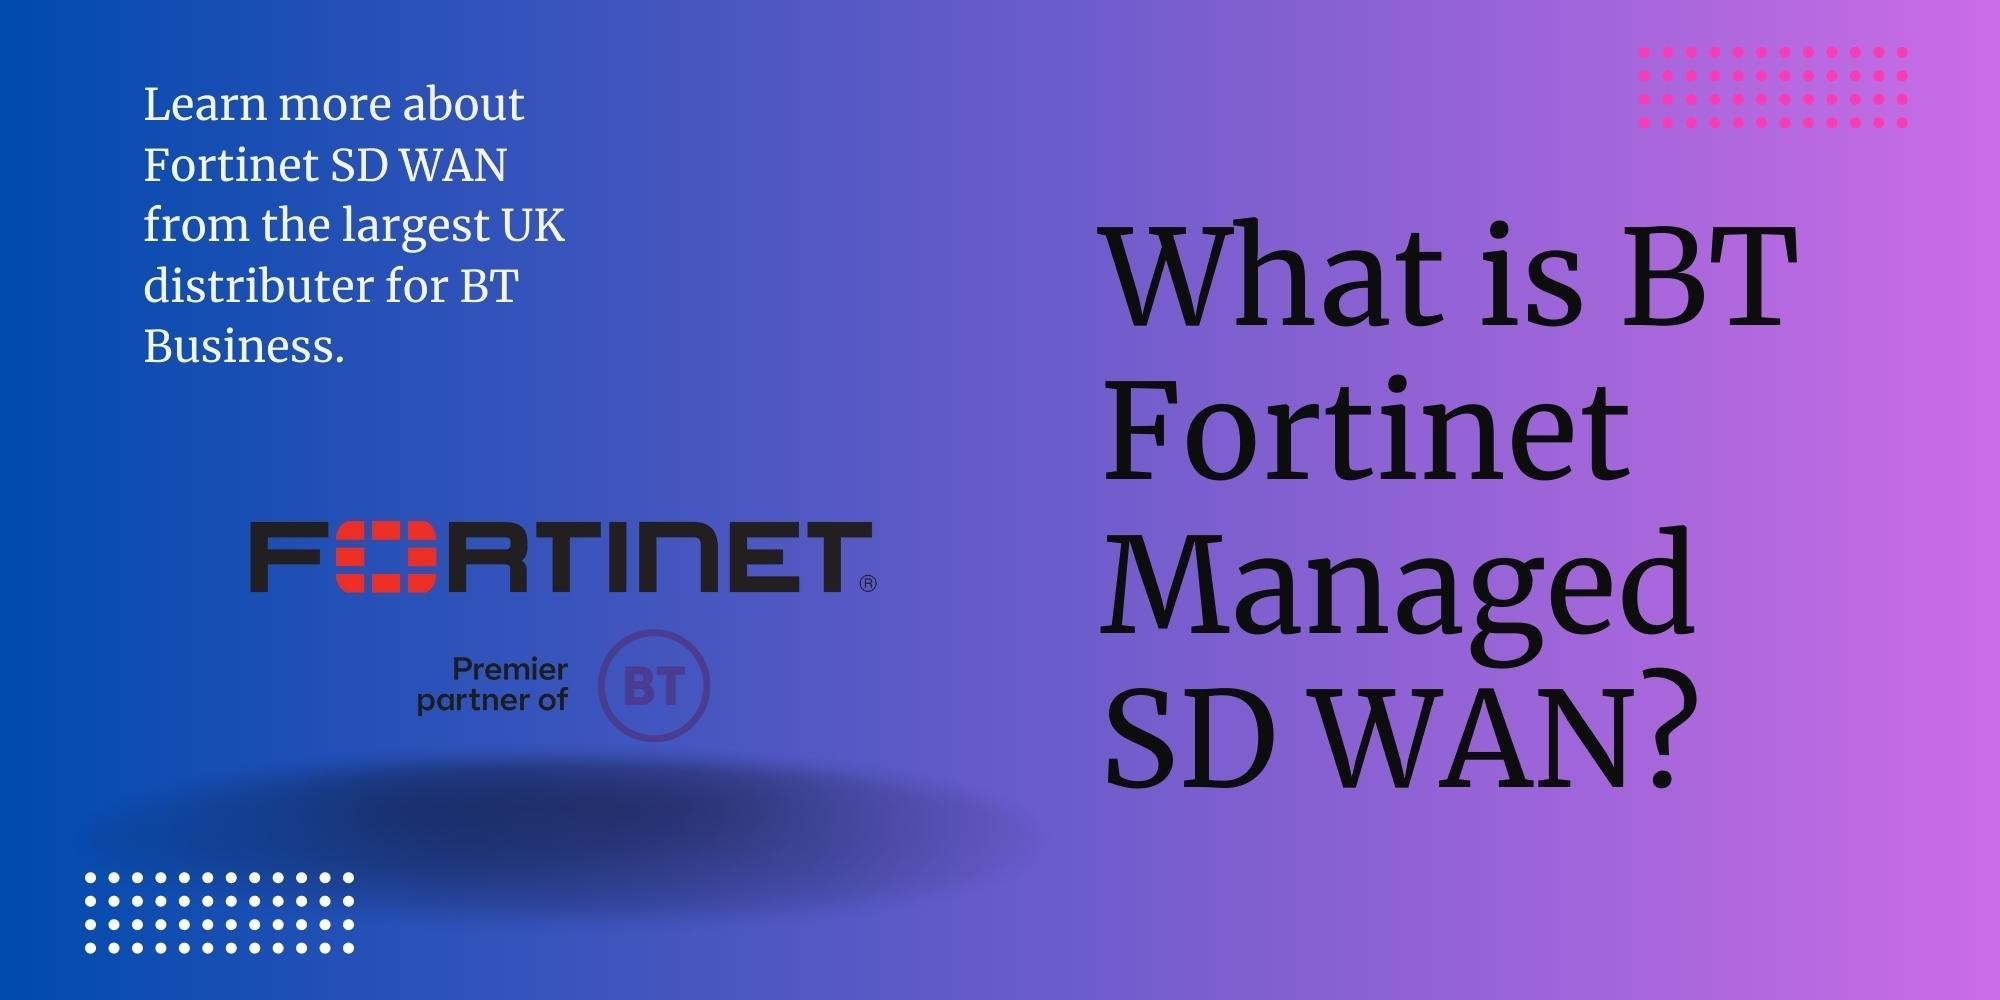 What is Fortinet managed SD WAN